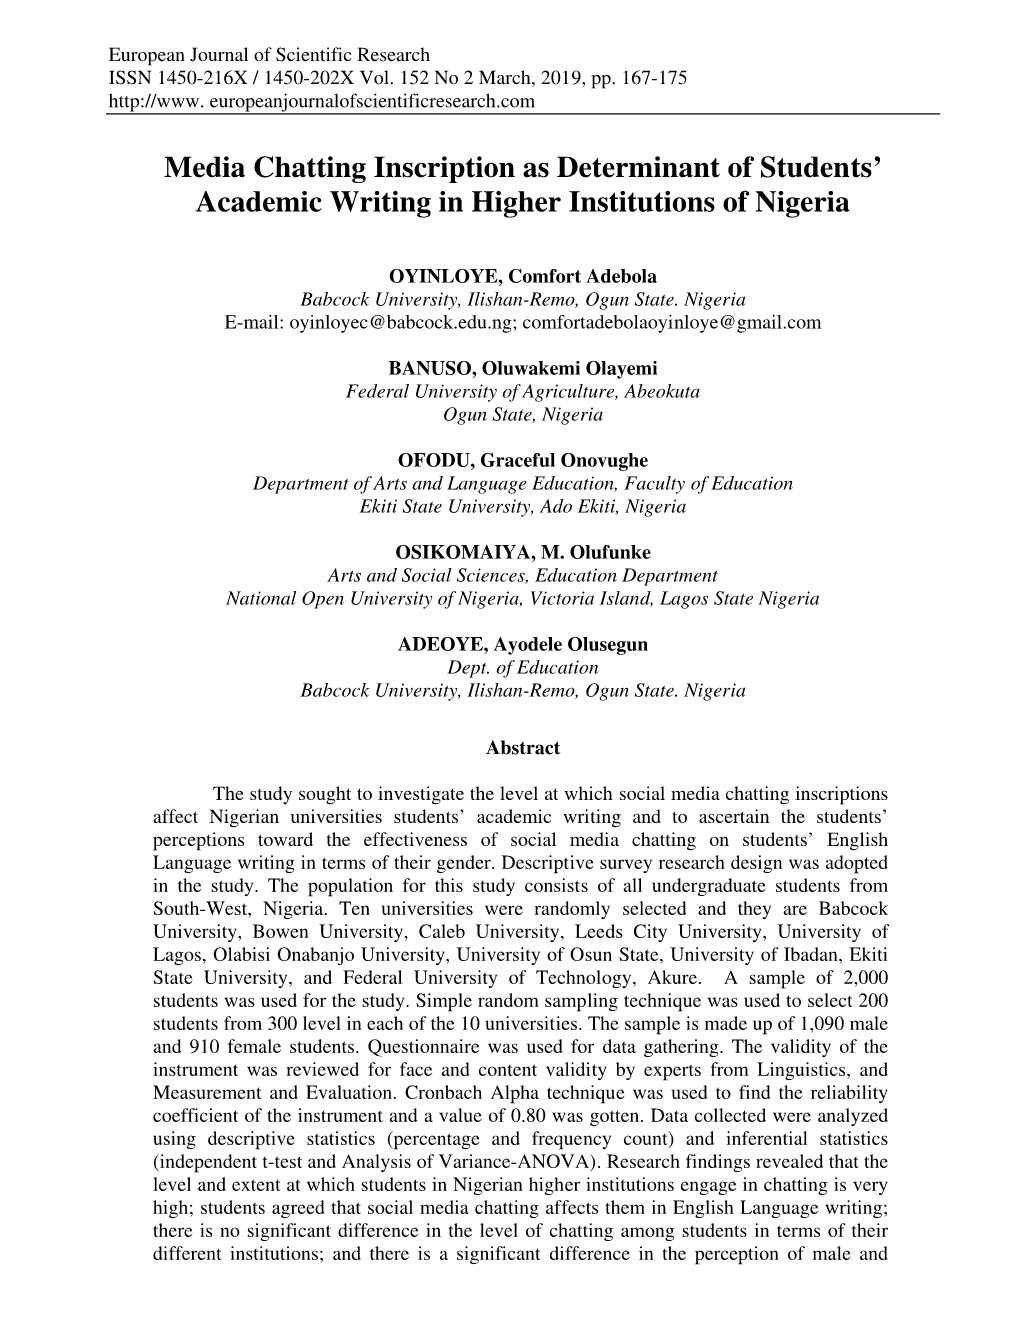 Media Chatting Inscription As Determinant of Students' Academic Writing in Higher Institutions of Nigeria